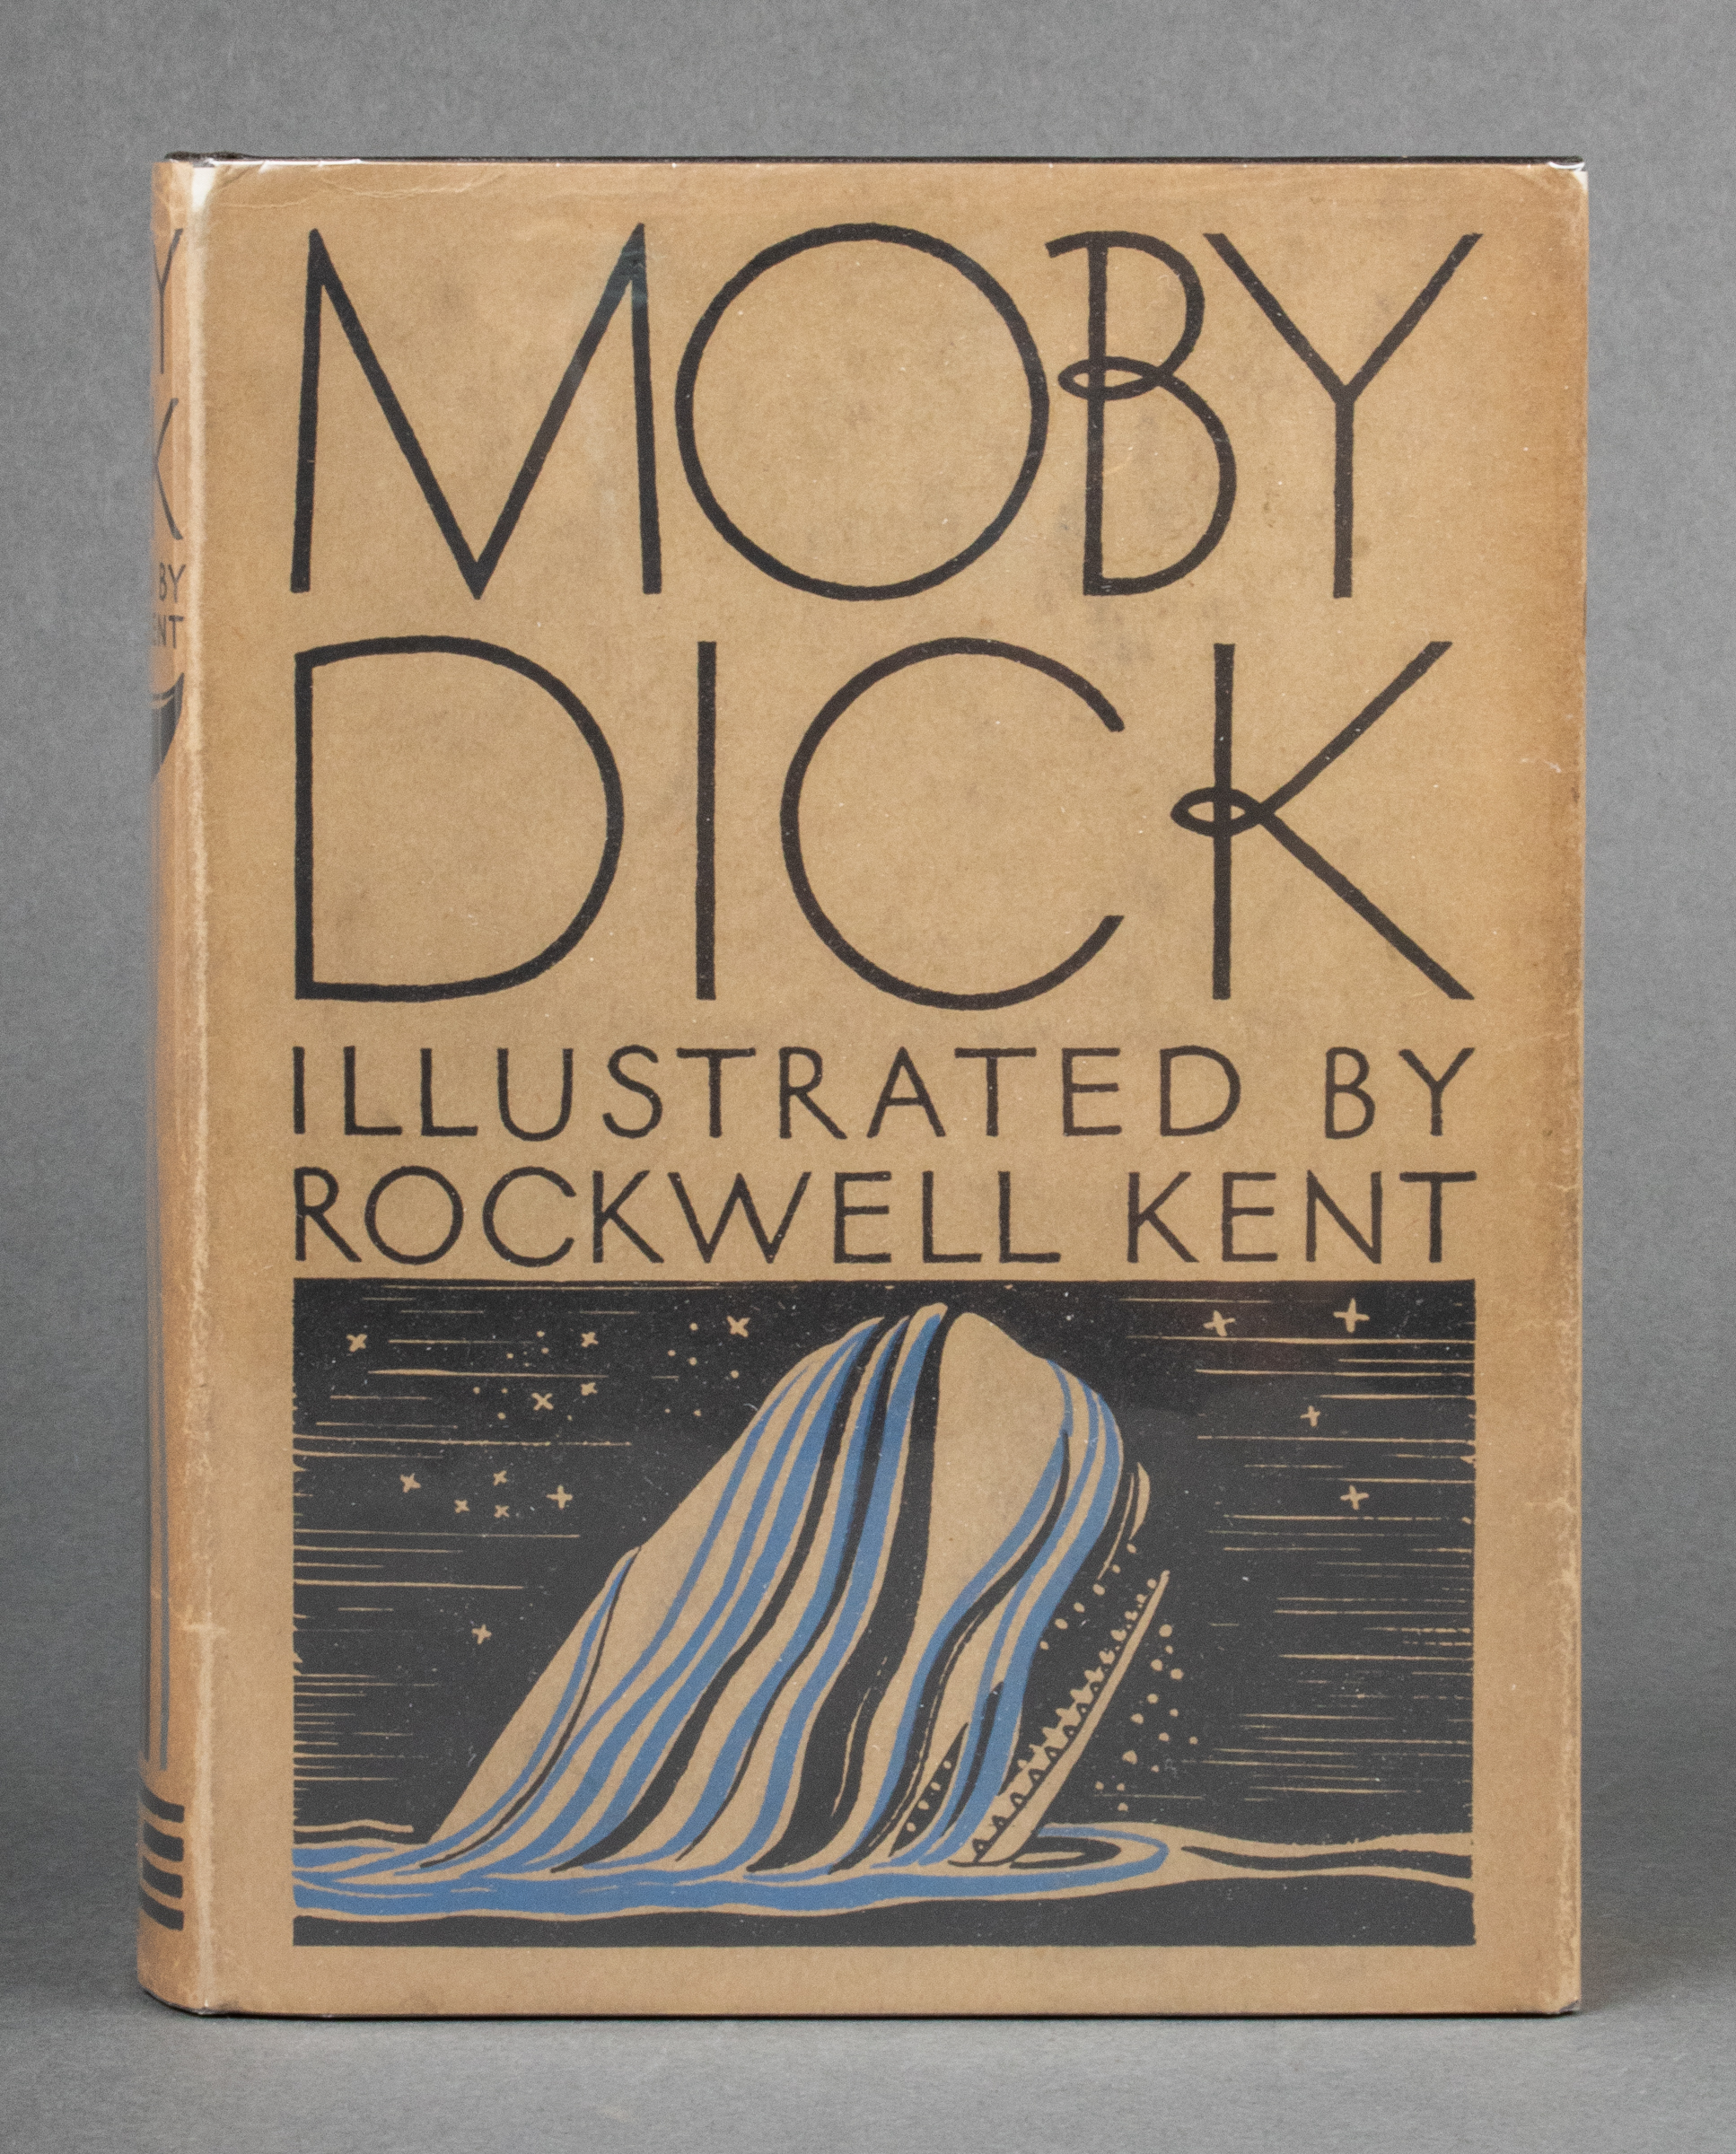 ROCKWELL KENT MOBY DICK 1930 WITH